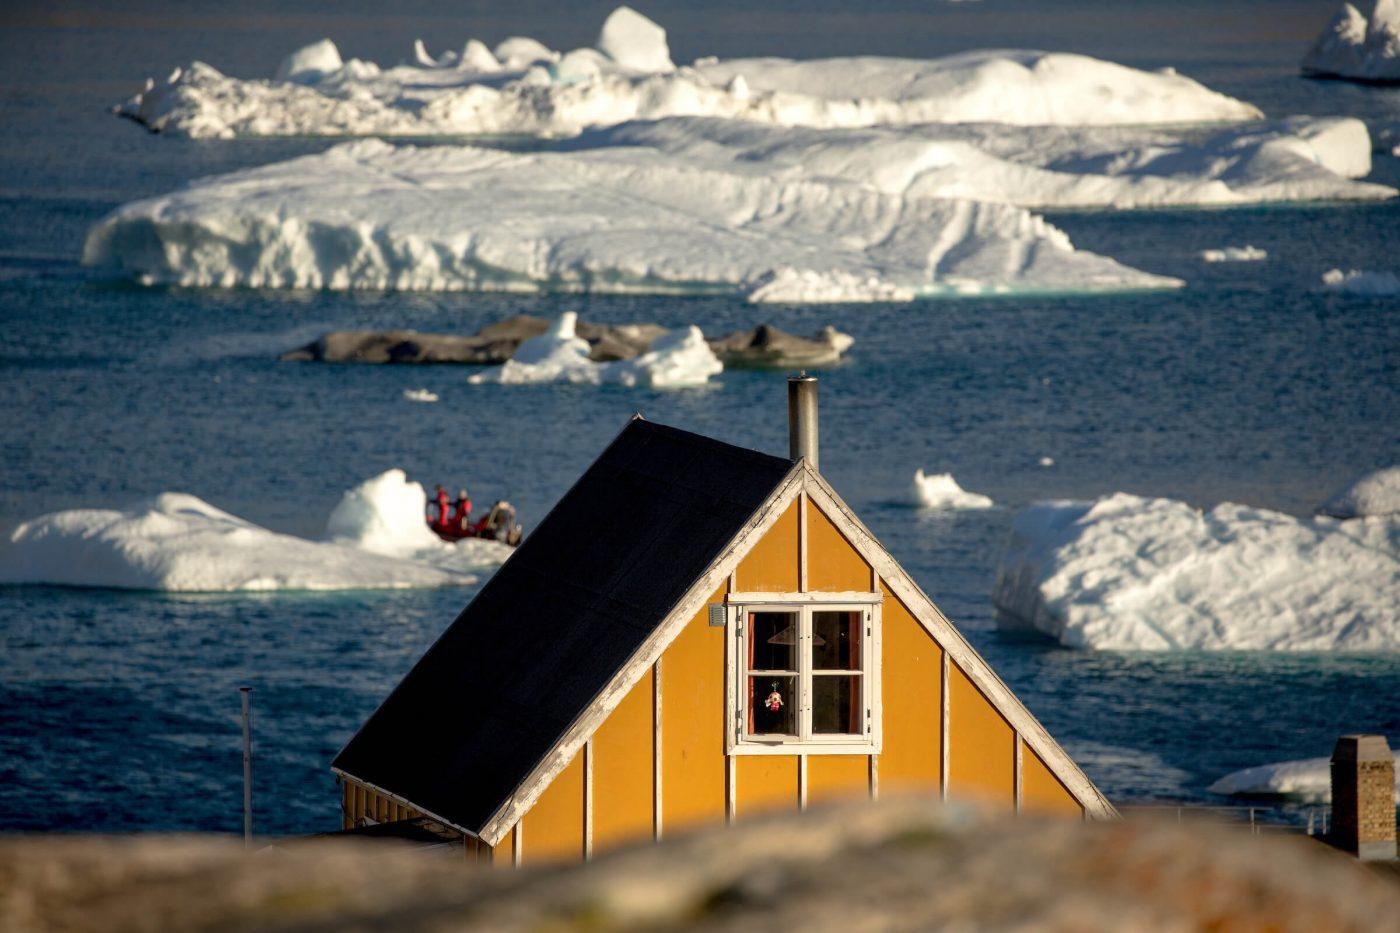 A house and icebergs in Ukkusissat in Greenland. Photo by Mads Pihl